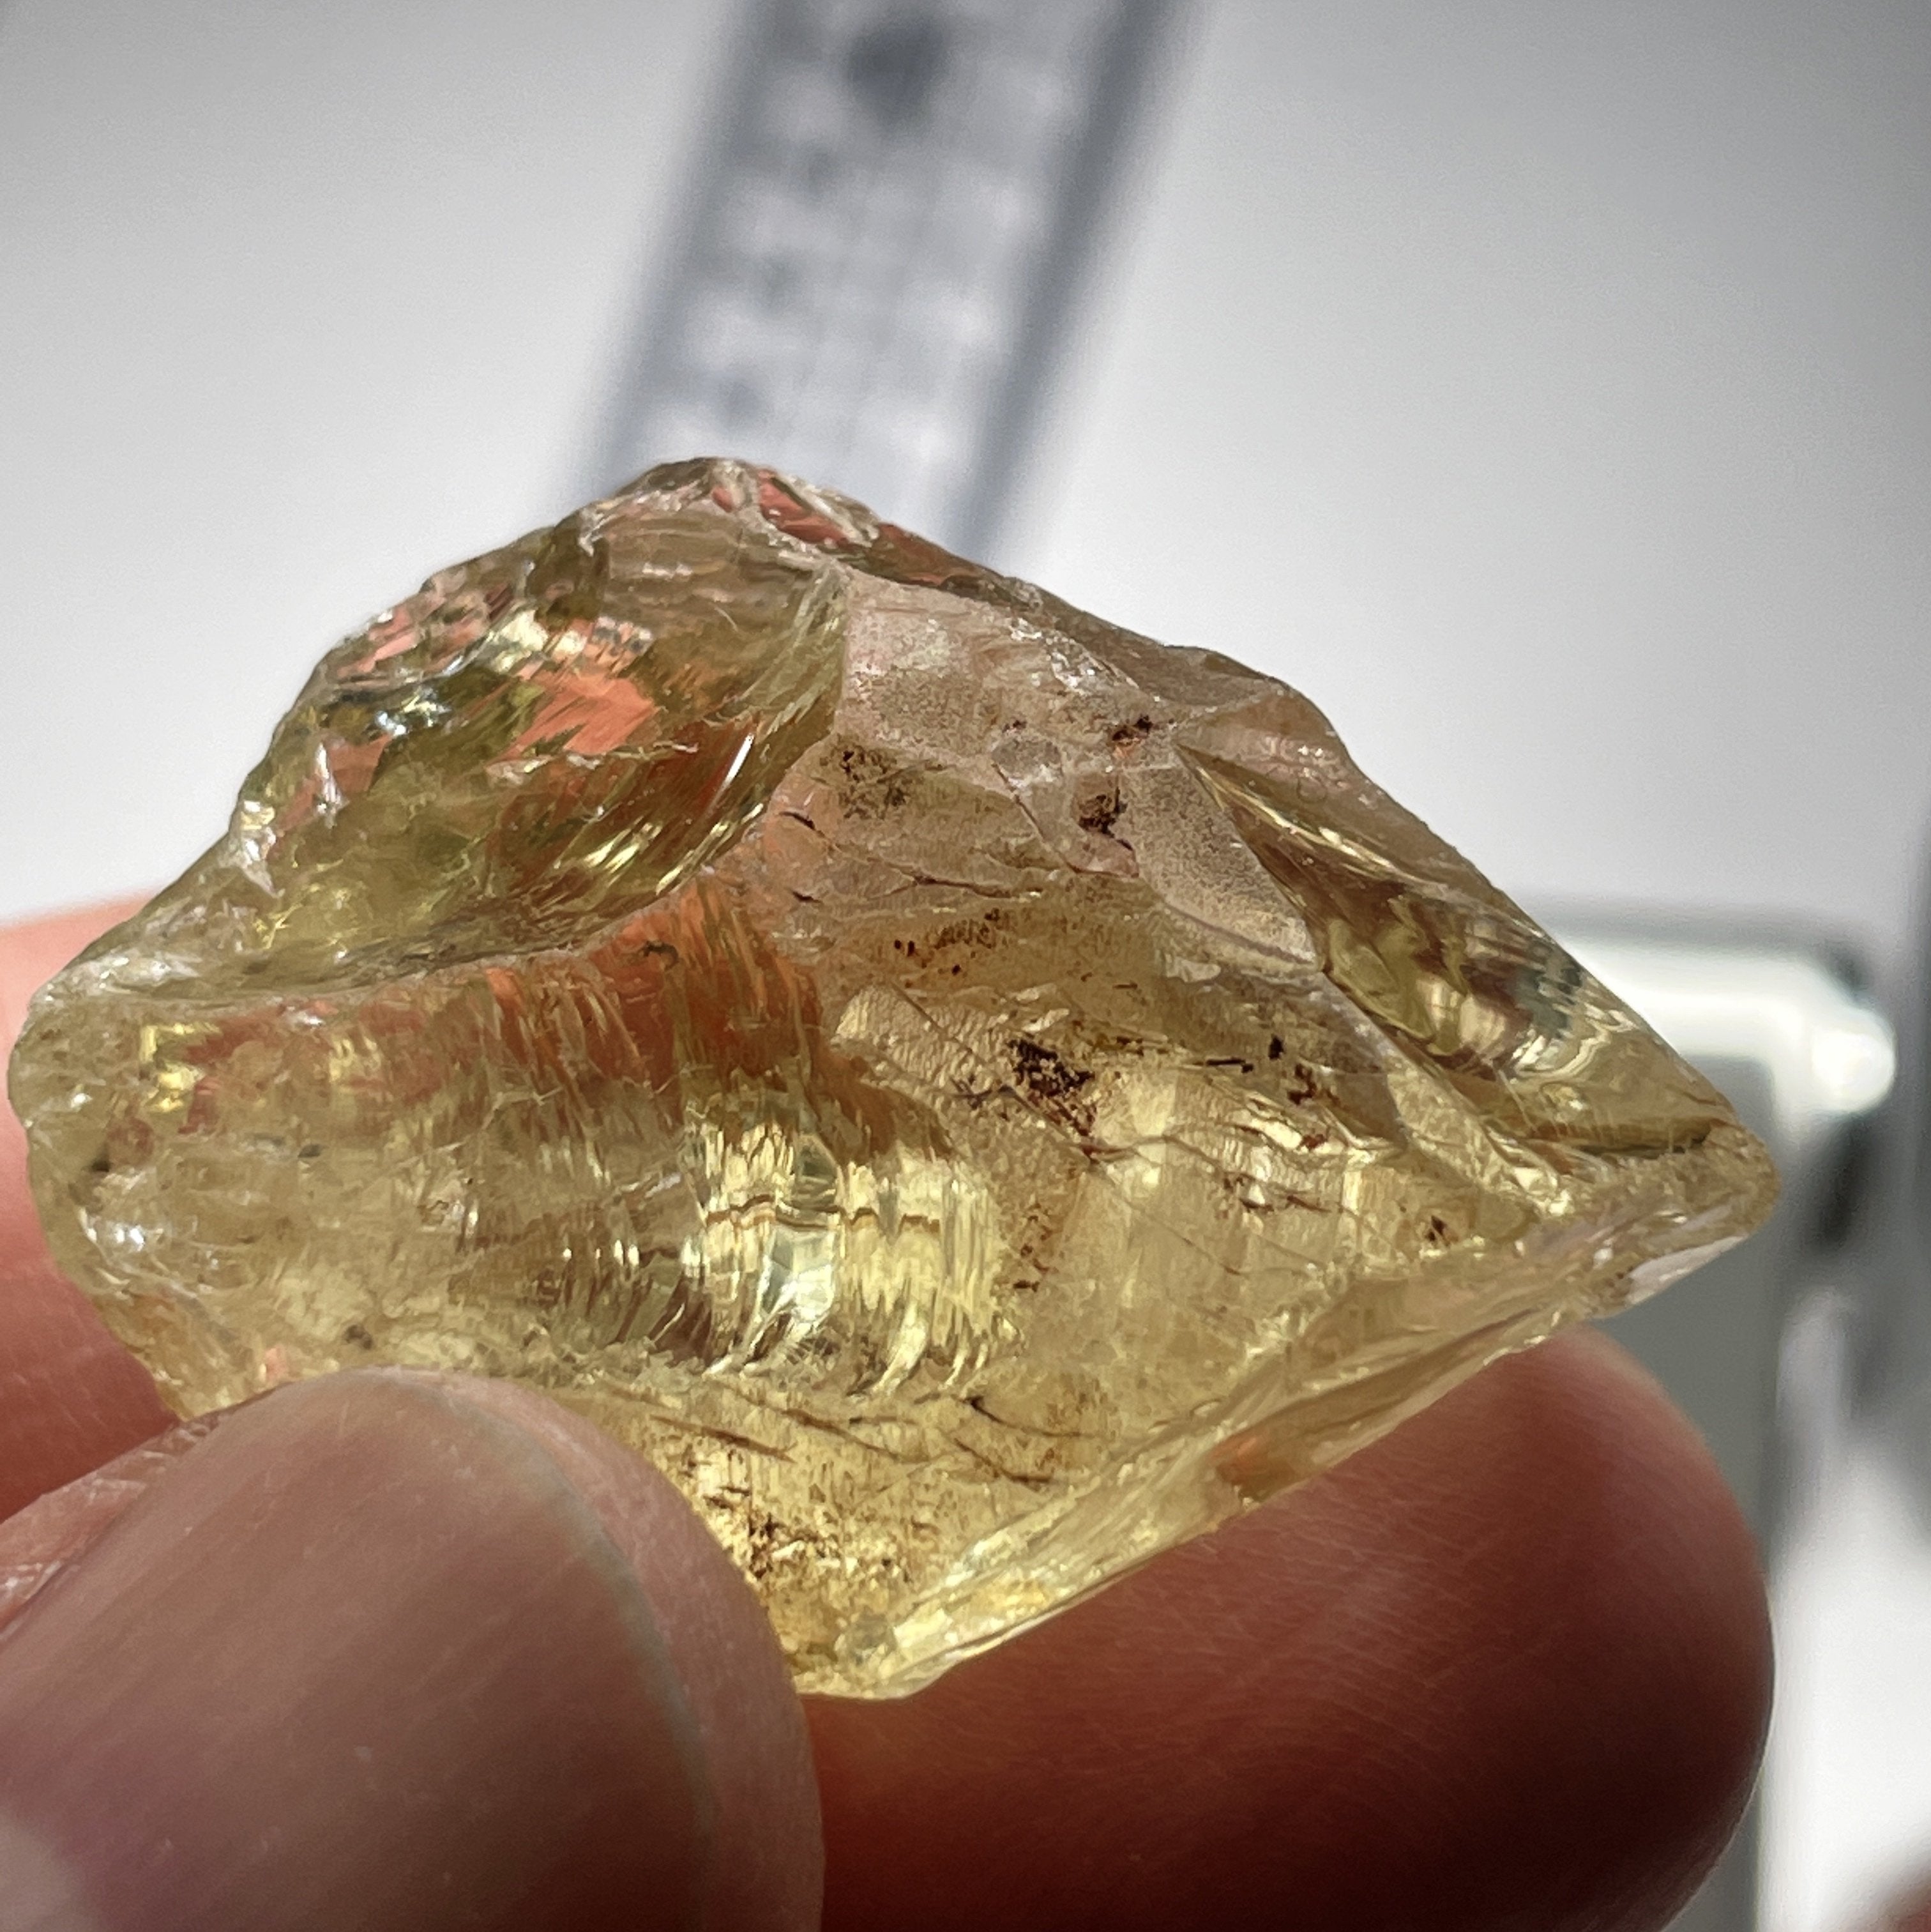 17.59Gm Citrine Zambia. Untreated Unheated. Rare As Not Heated From Amethyst Natural Colour.